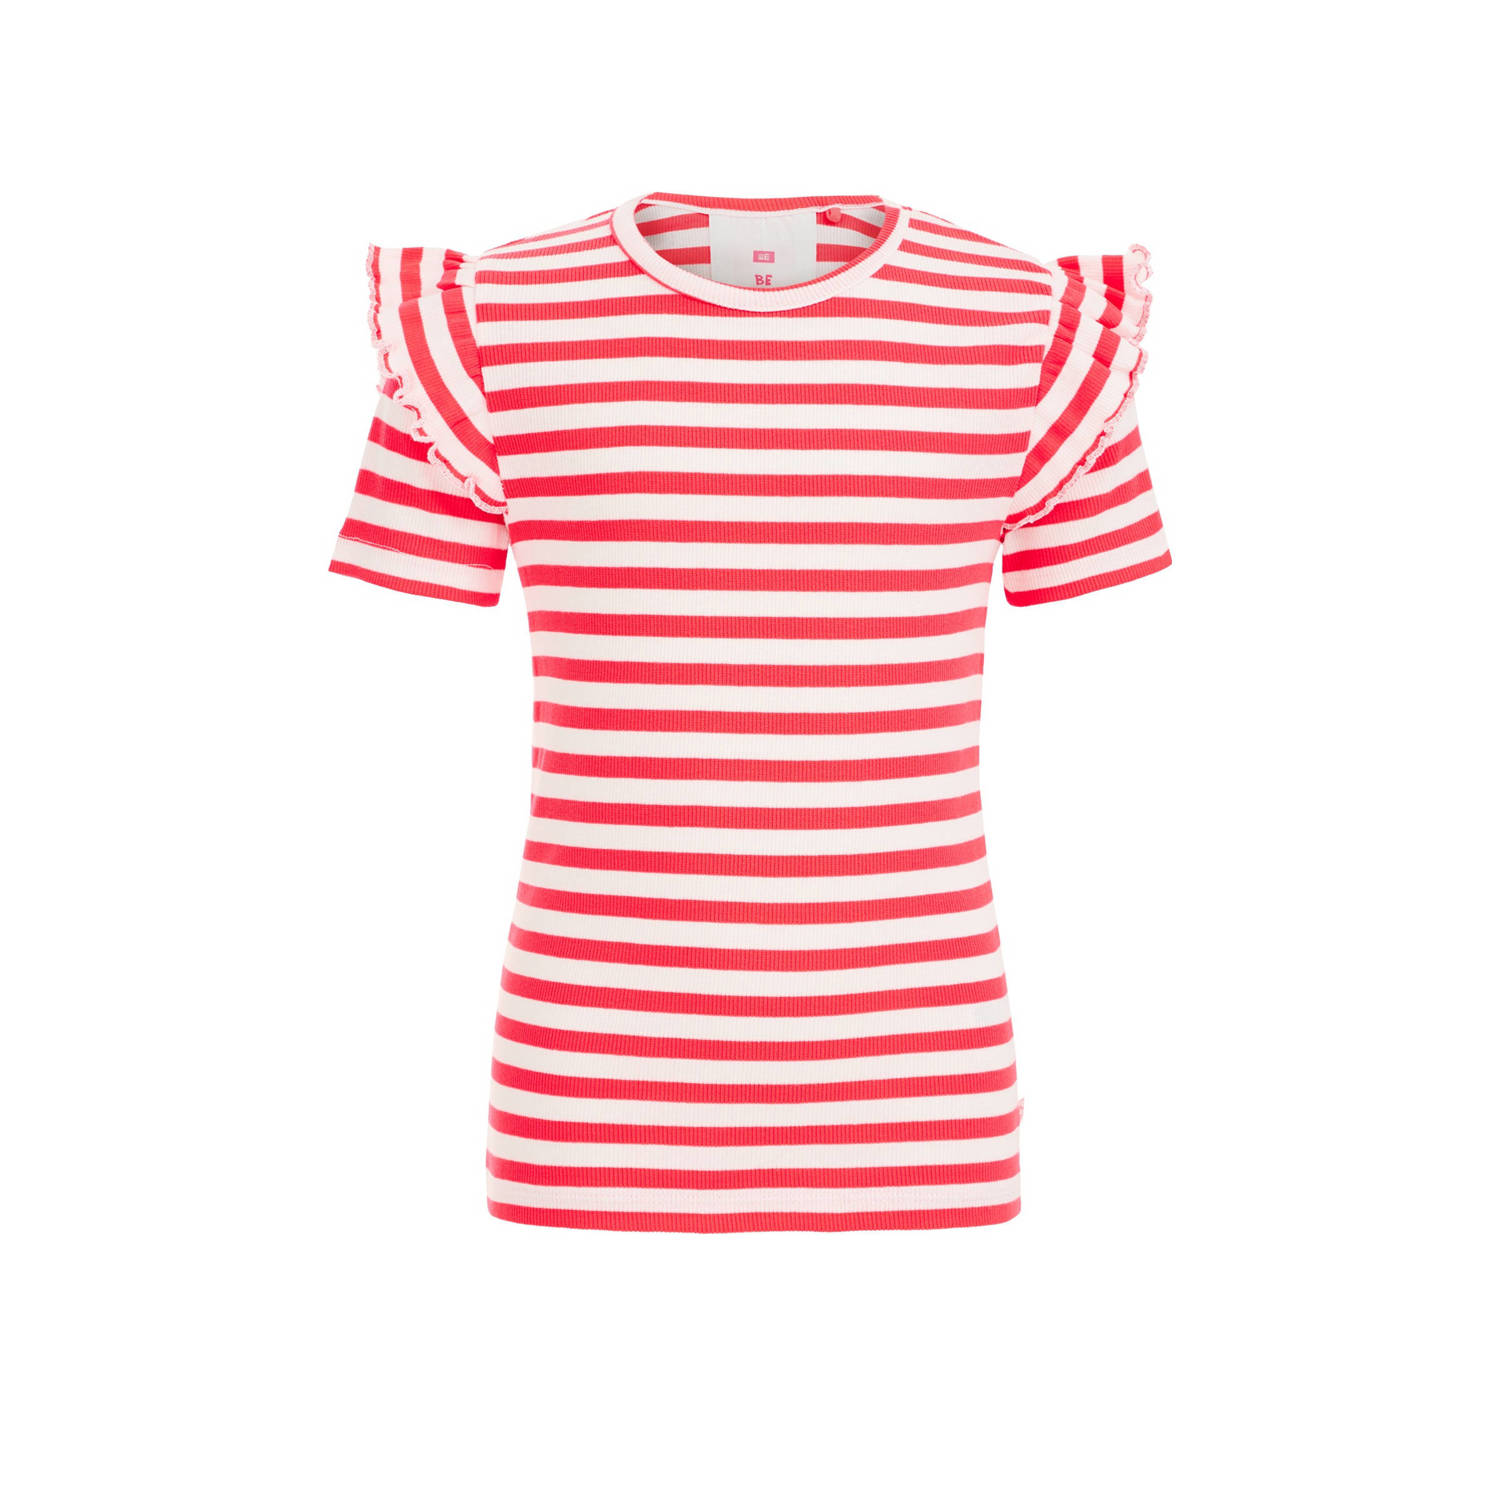 WE Fashion gestreept T-shirt rood wit Meisjes Polyester Ronde hals Streep 110 116